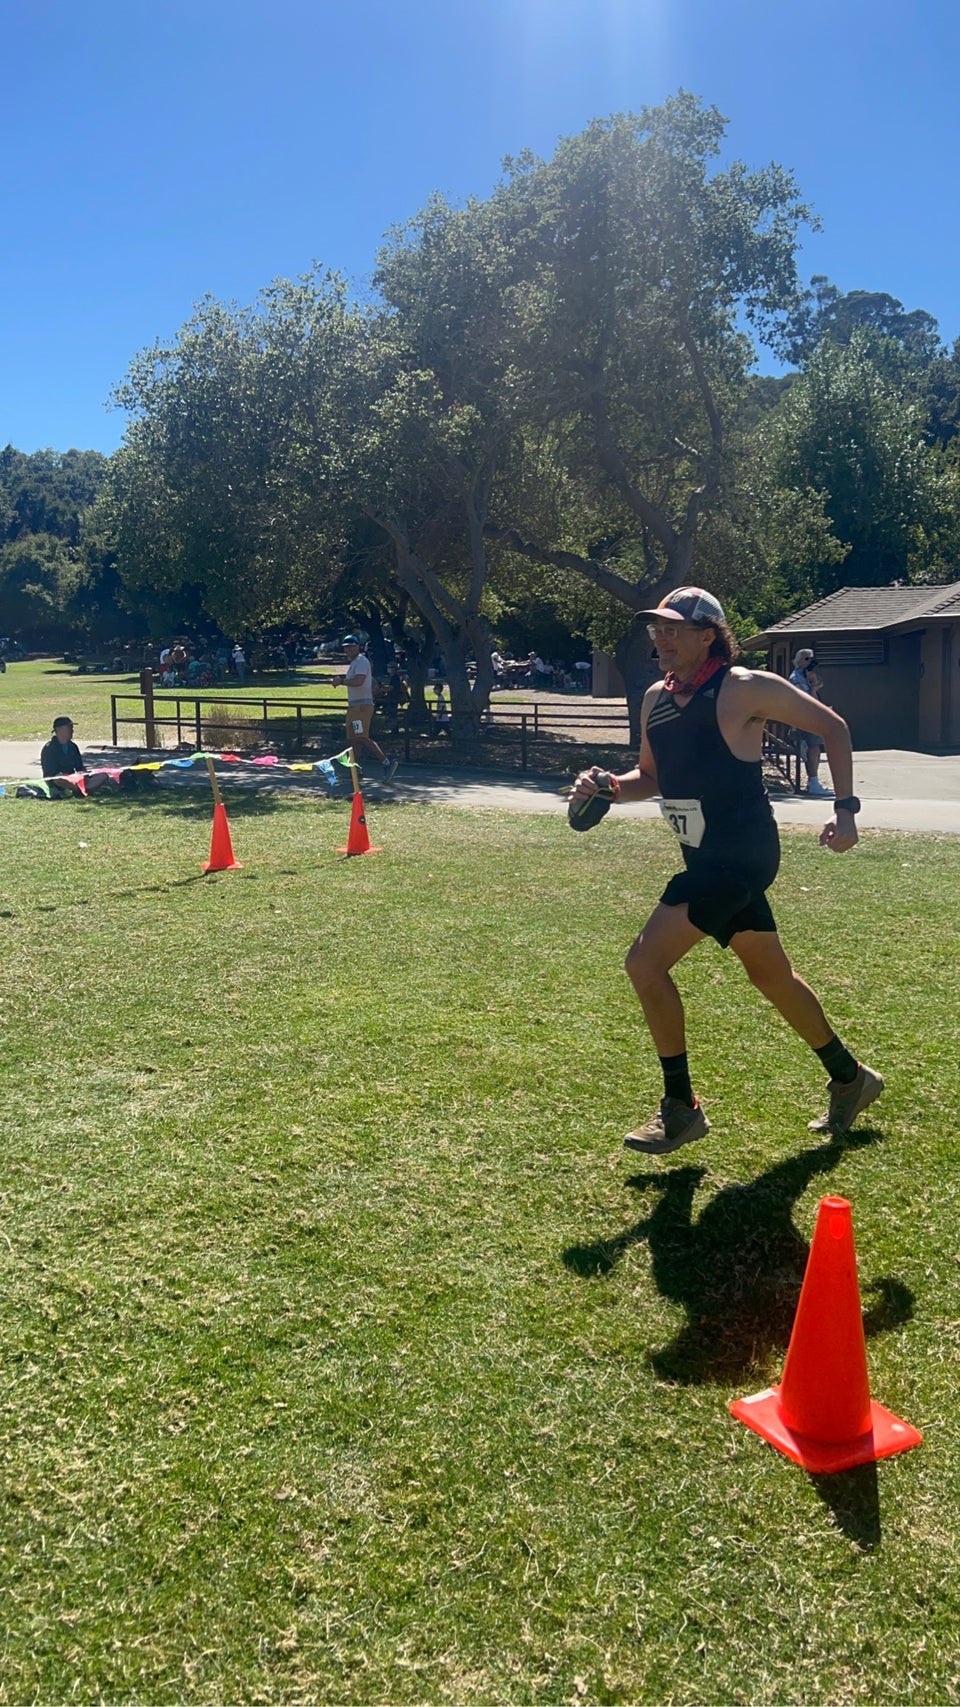 Tantek running mid-stride, arms swinging, on a lawn between orange cones with a park building and trees behind him.